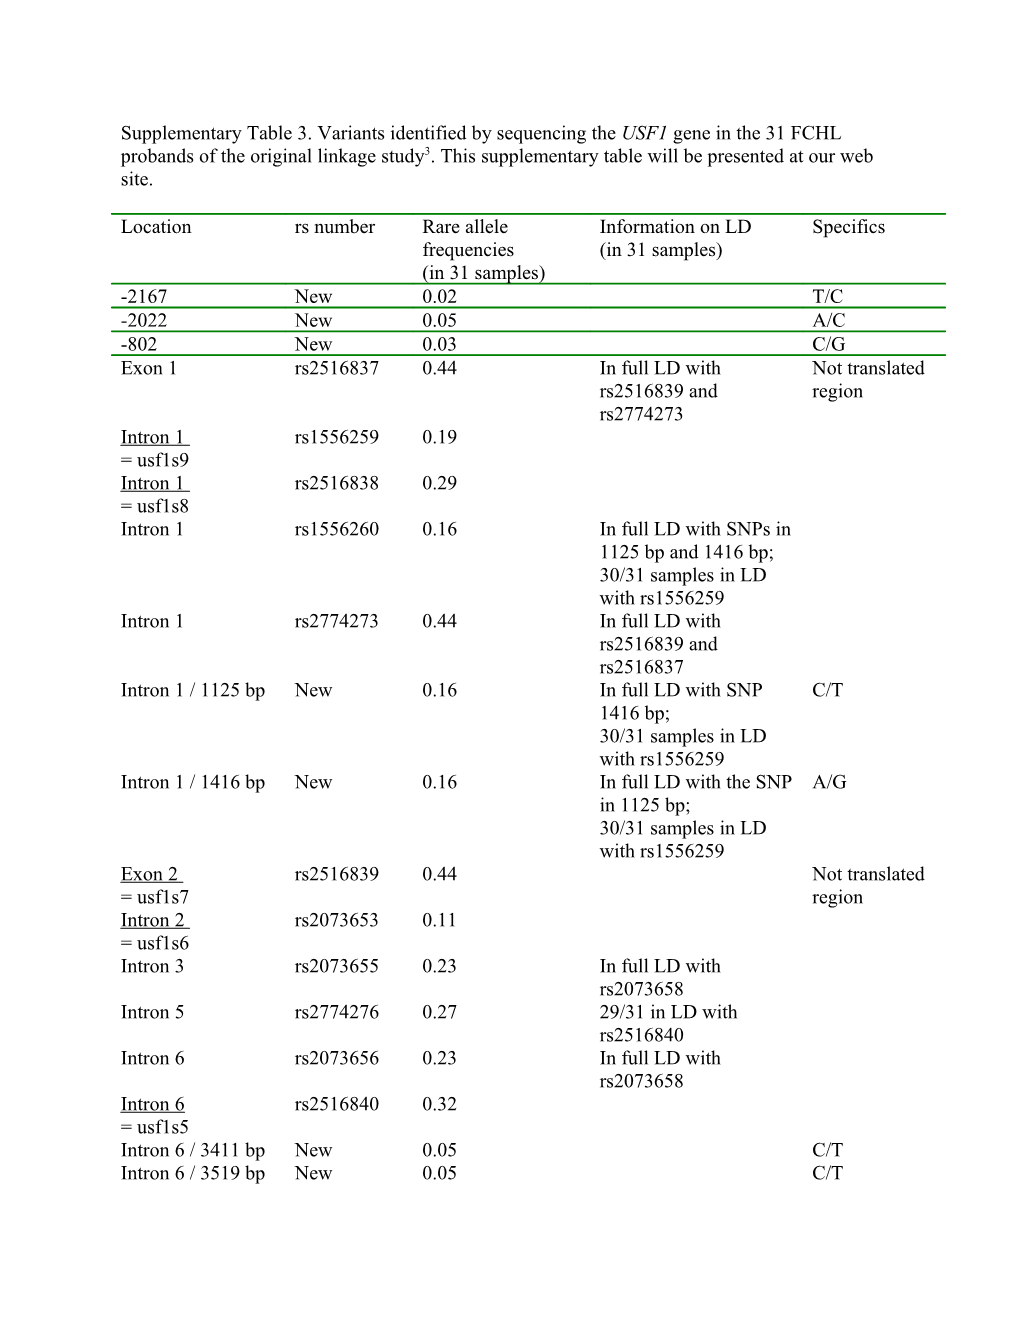 Supplementary Table 3. Variants Identified by Sequencing the USF1 Gene in the 31 FCHL Probands